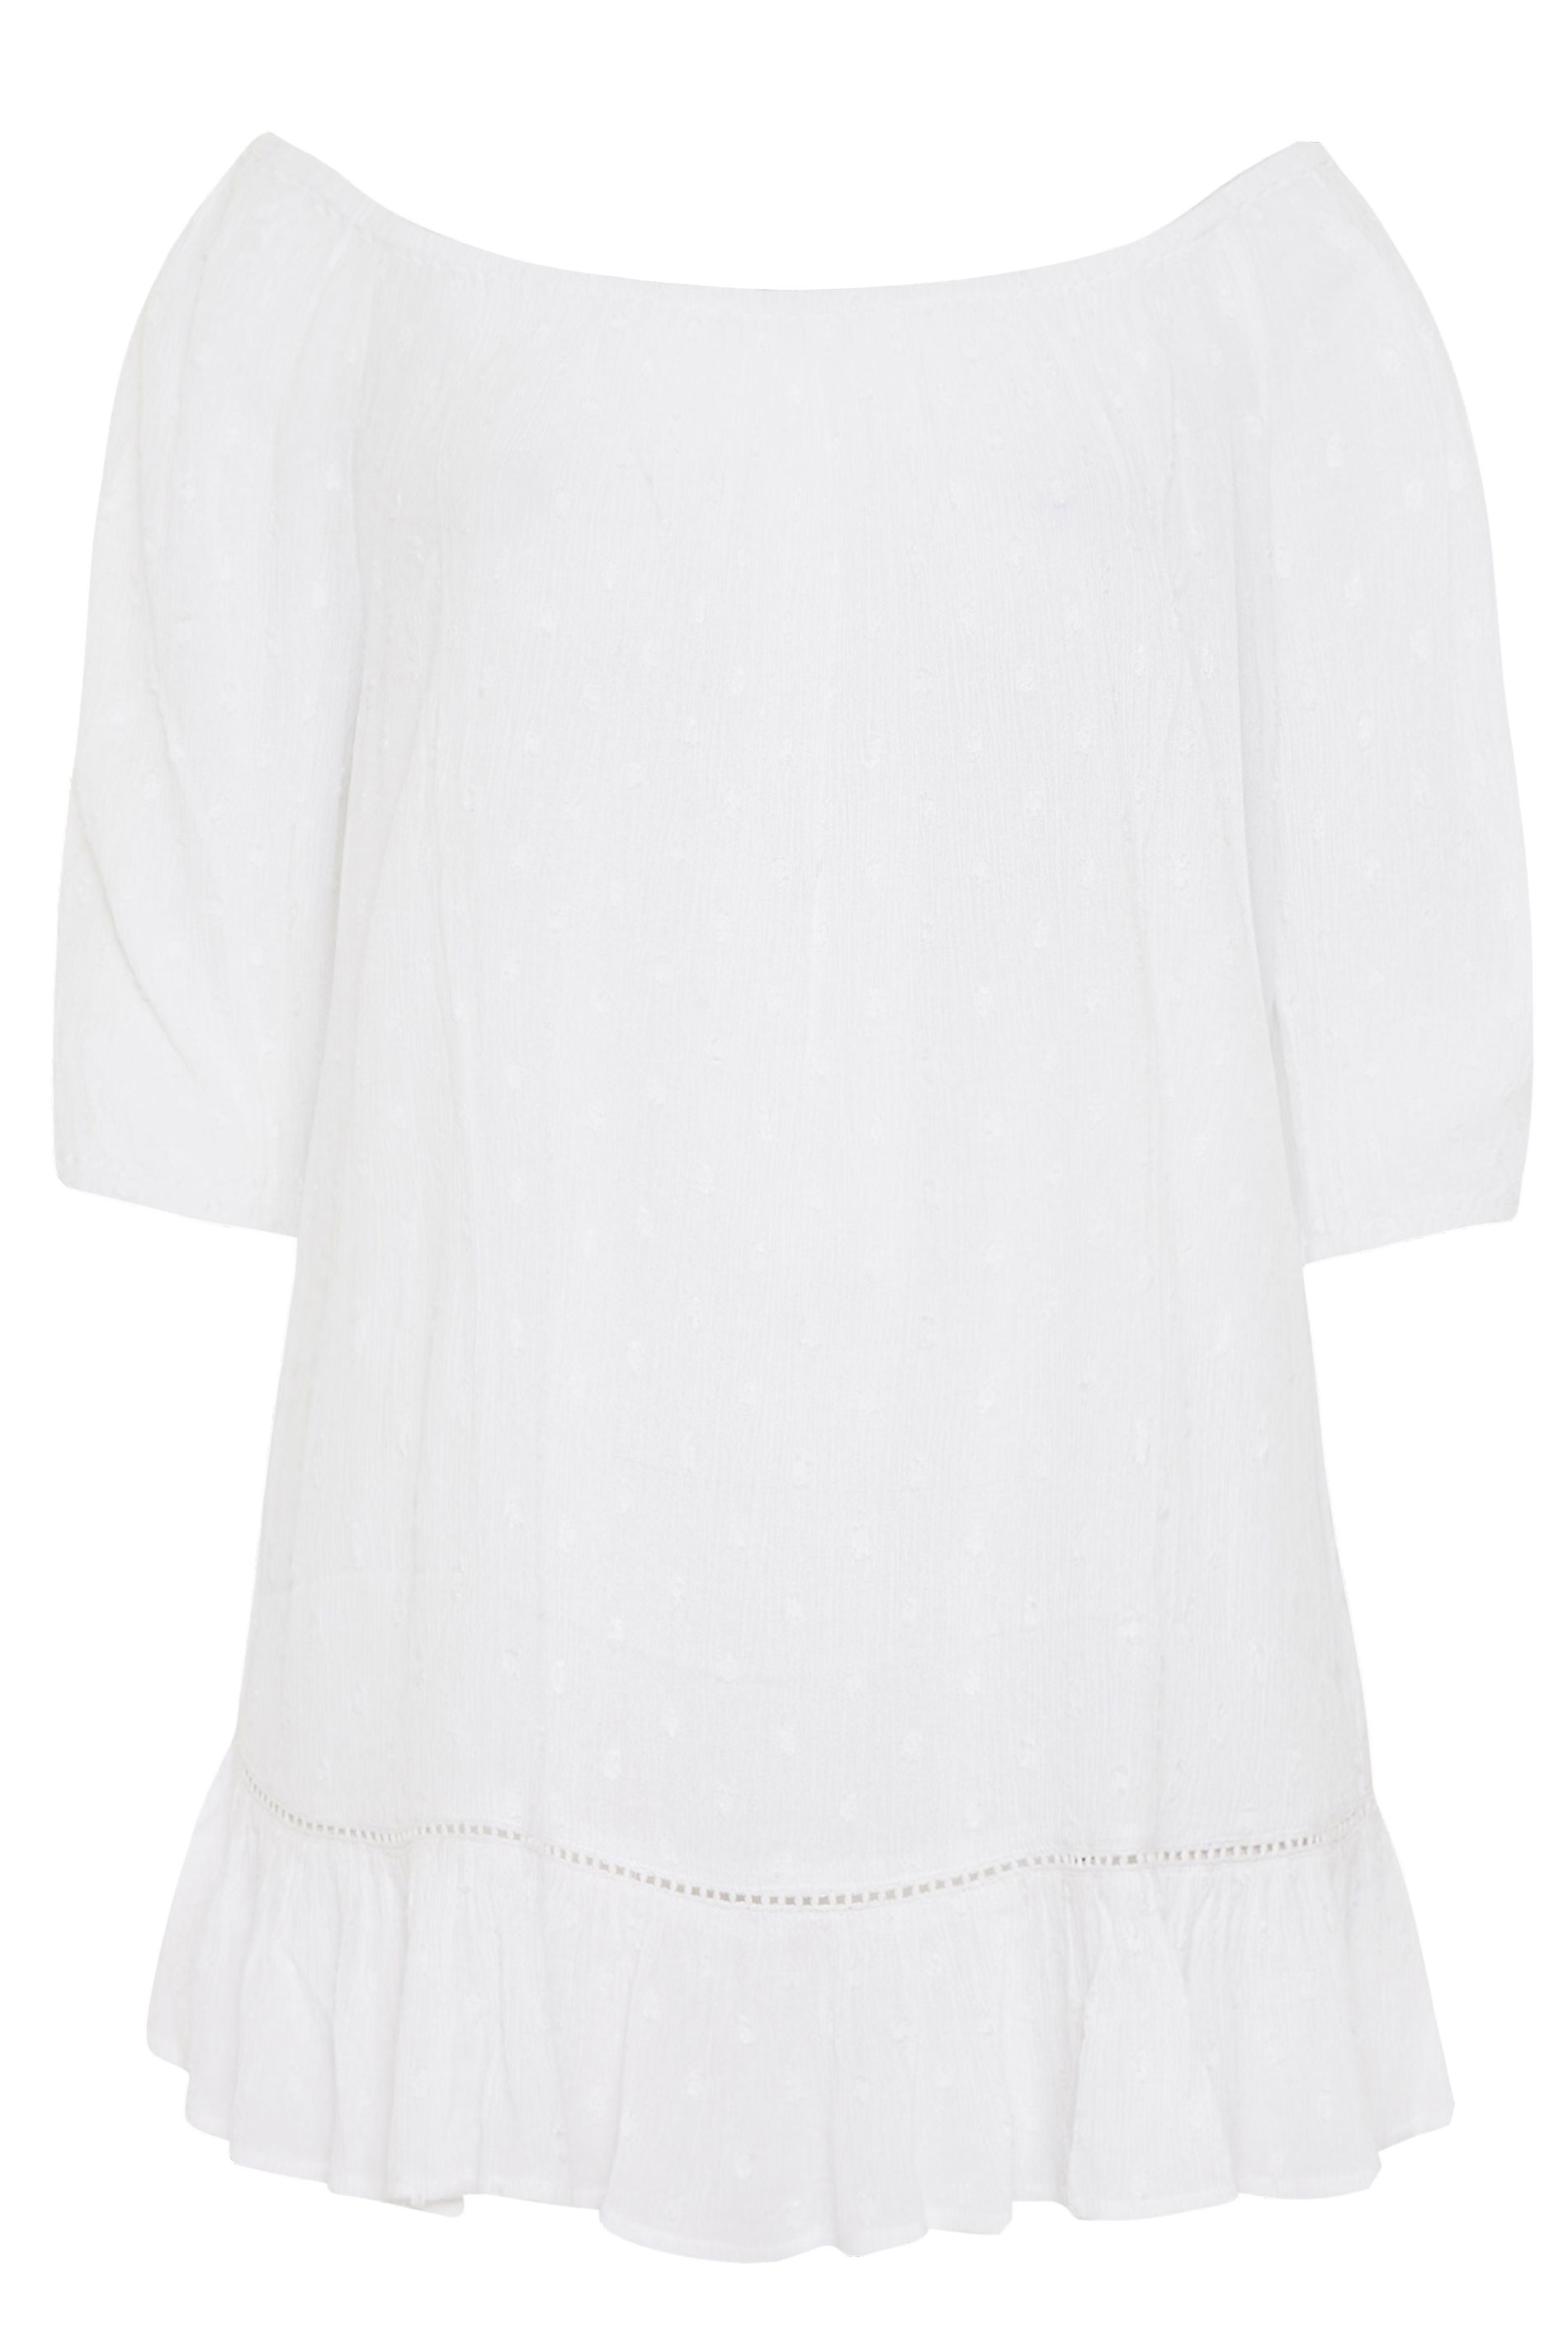 Grande taille  Tops Grande taille  Tops Casual | Top Blanc à Pois Style Bardot - AM42396